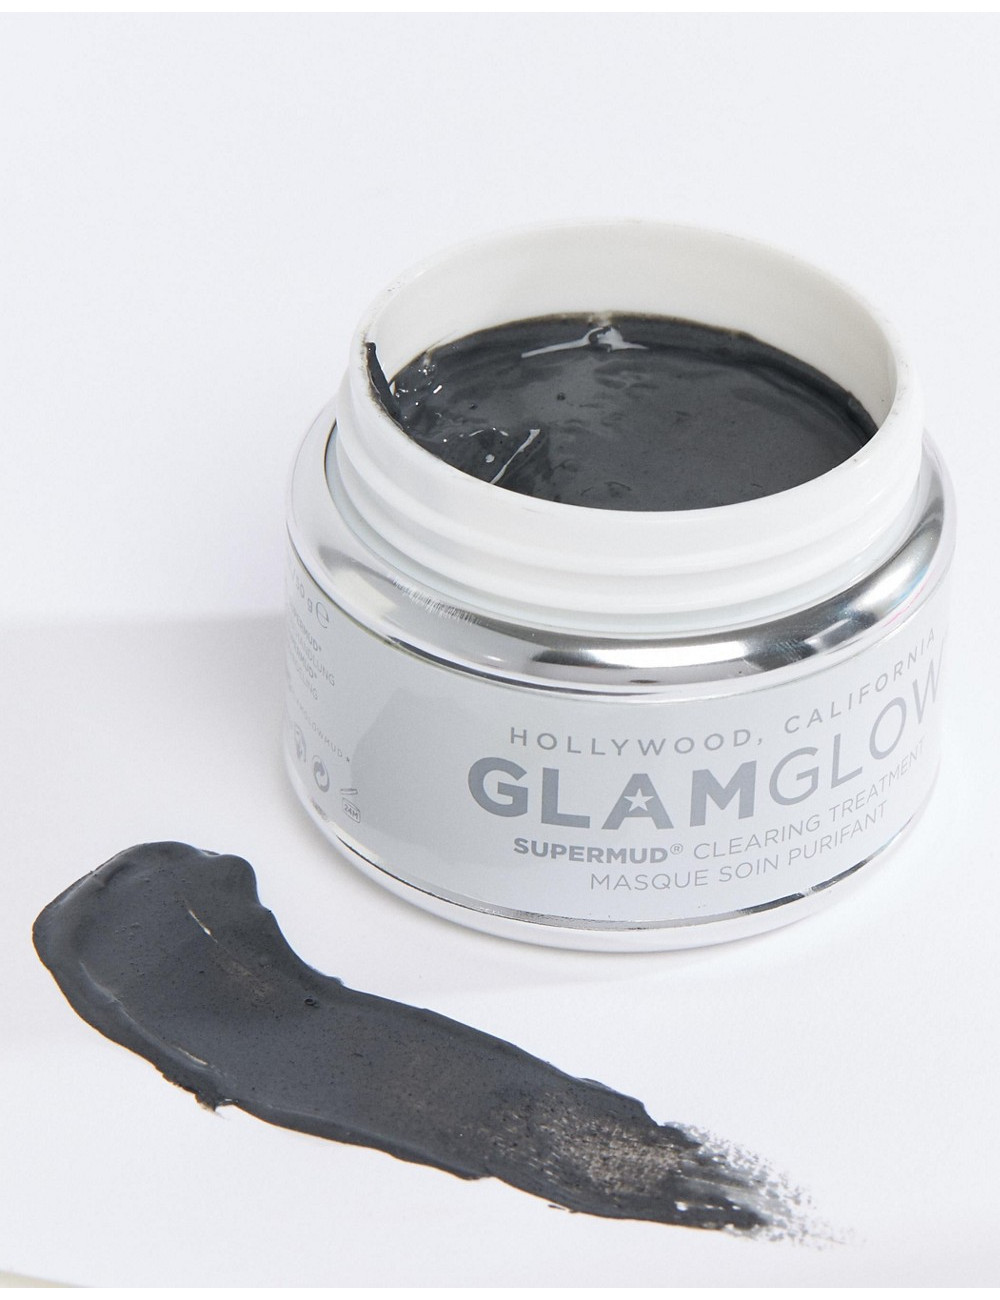 GLAMGLOW Supermud Clearing...